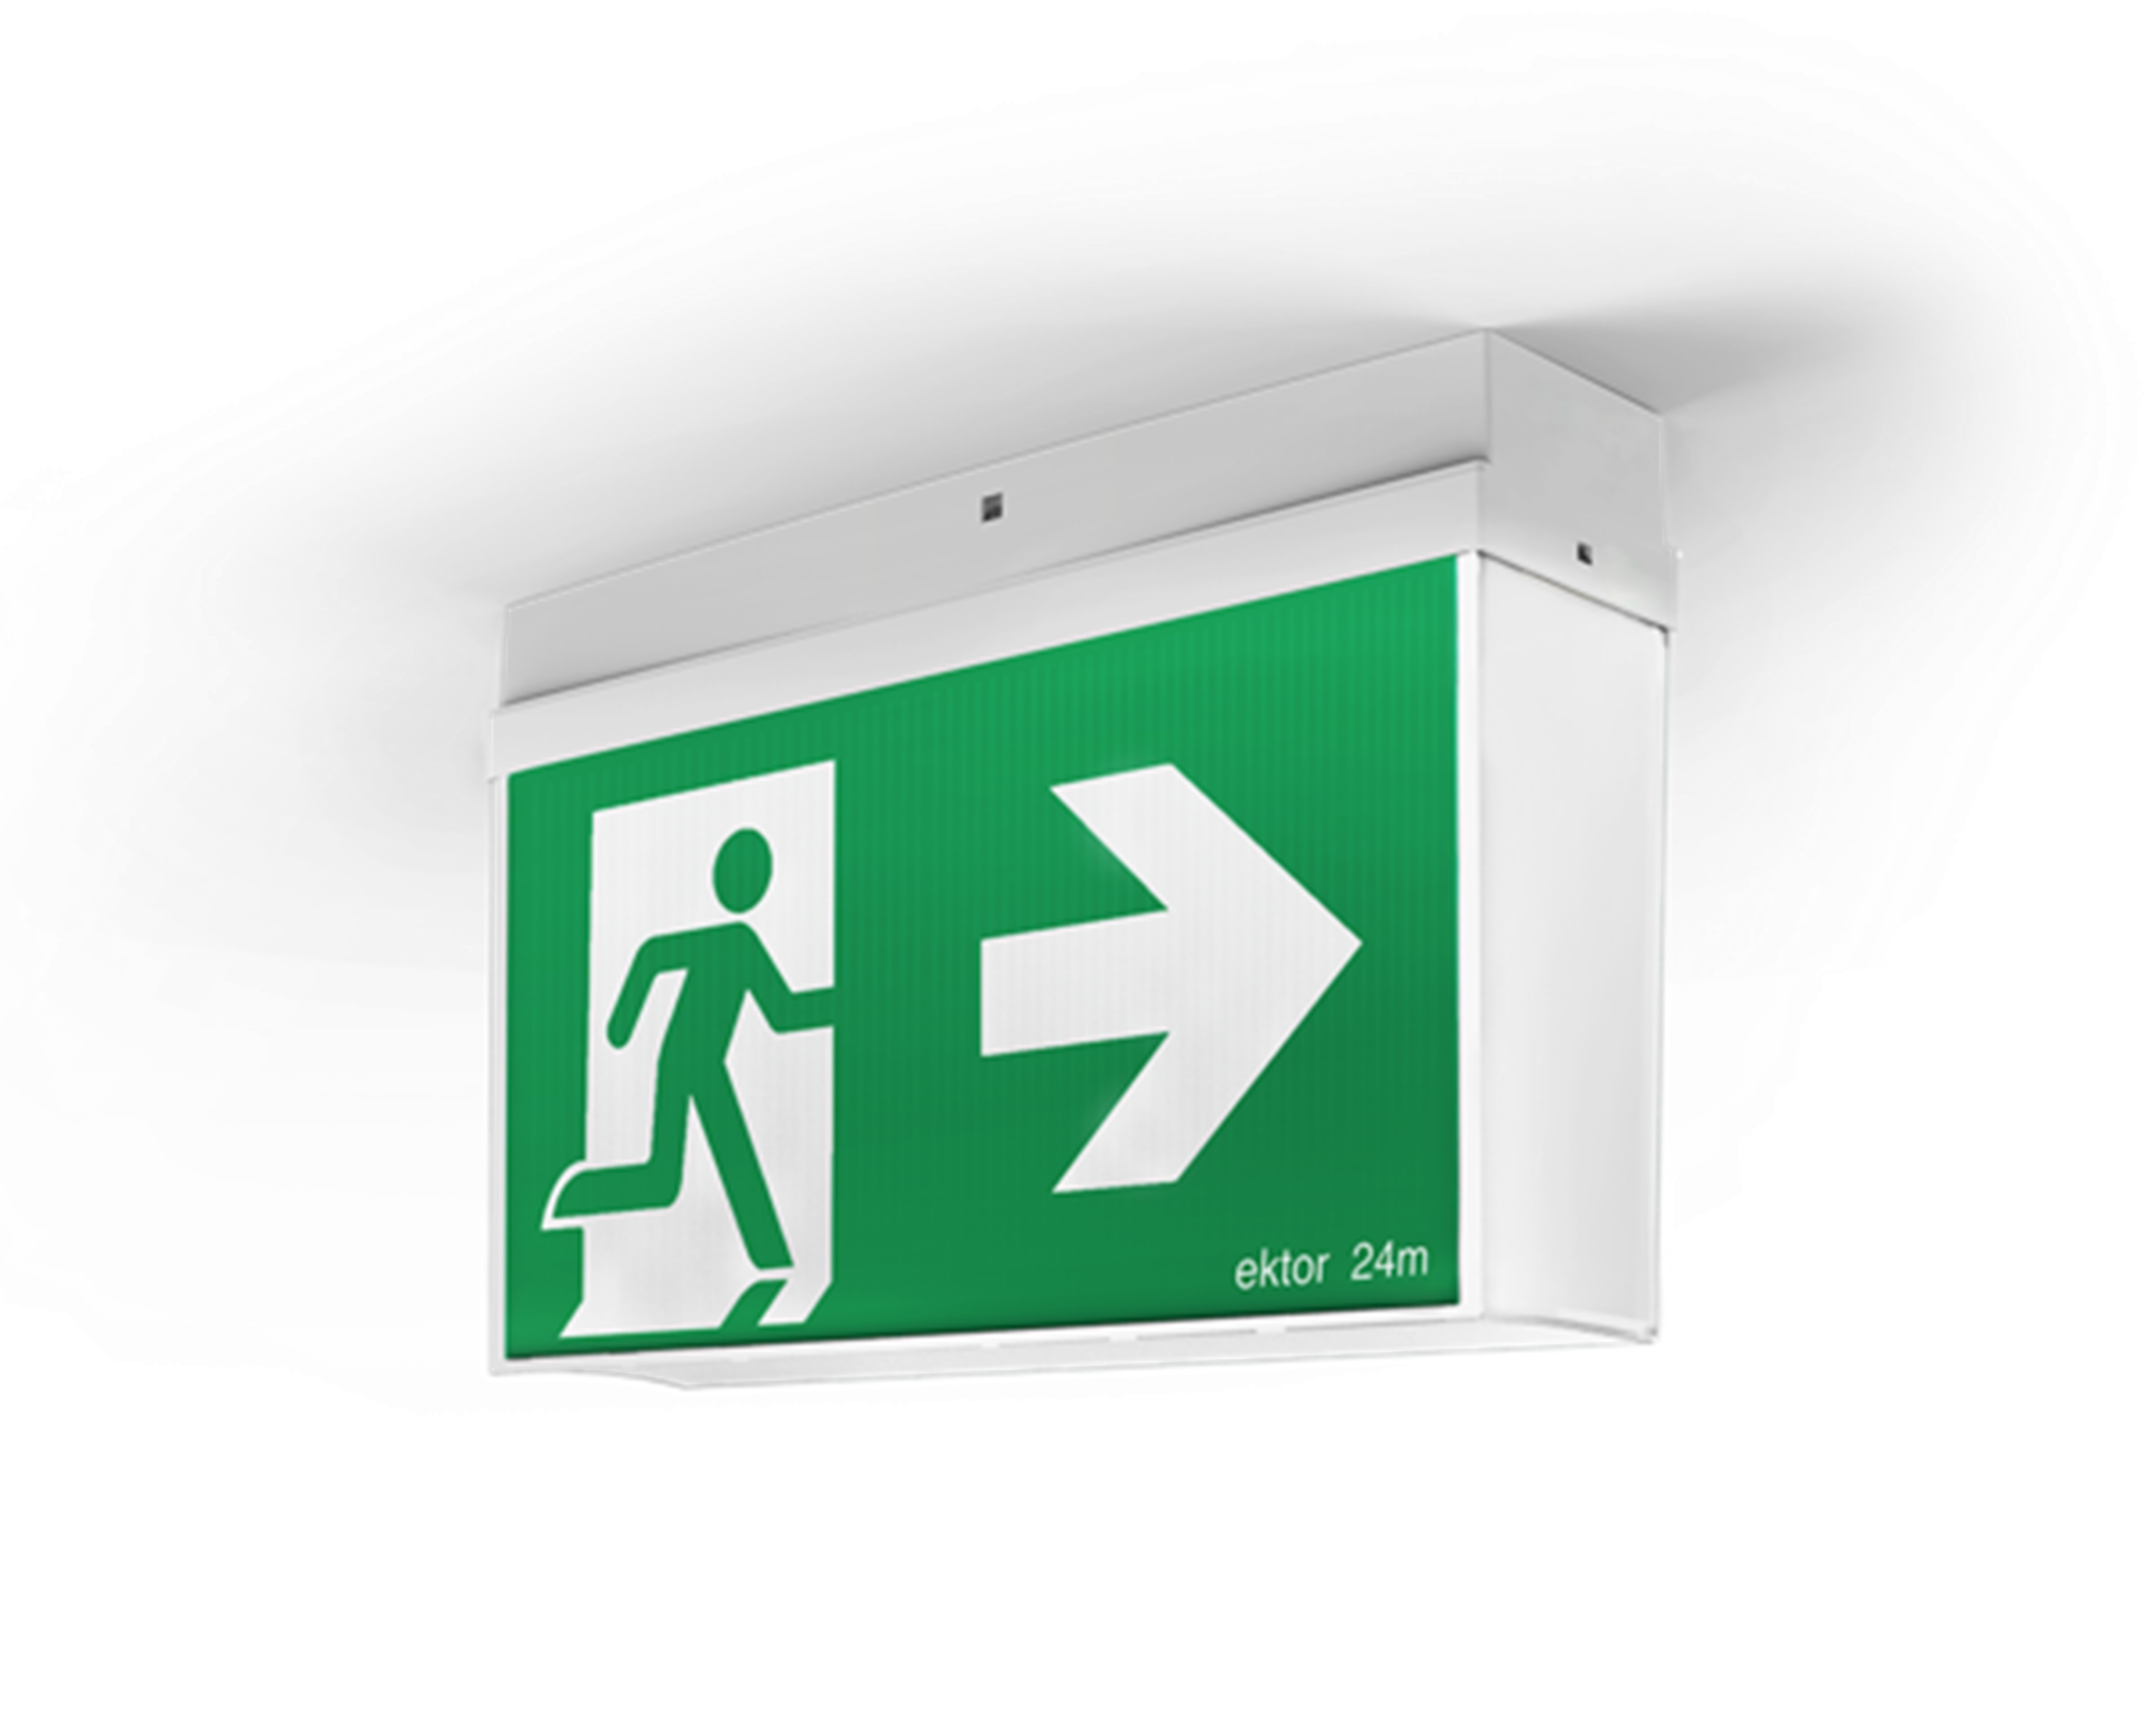 Exit and Emergency Lighting Failures Rate